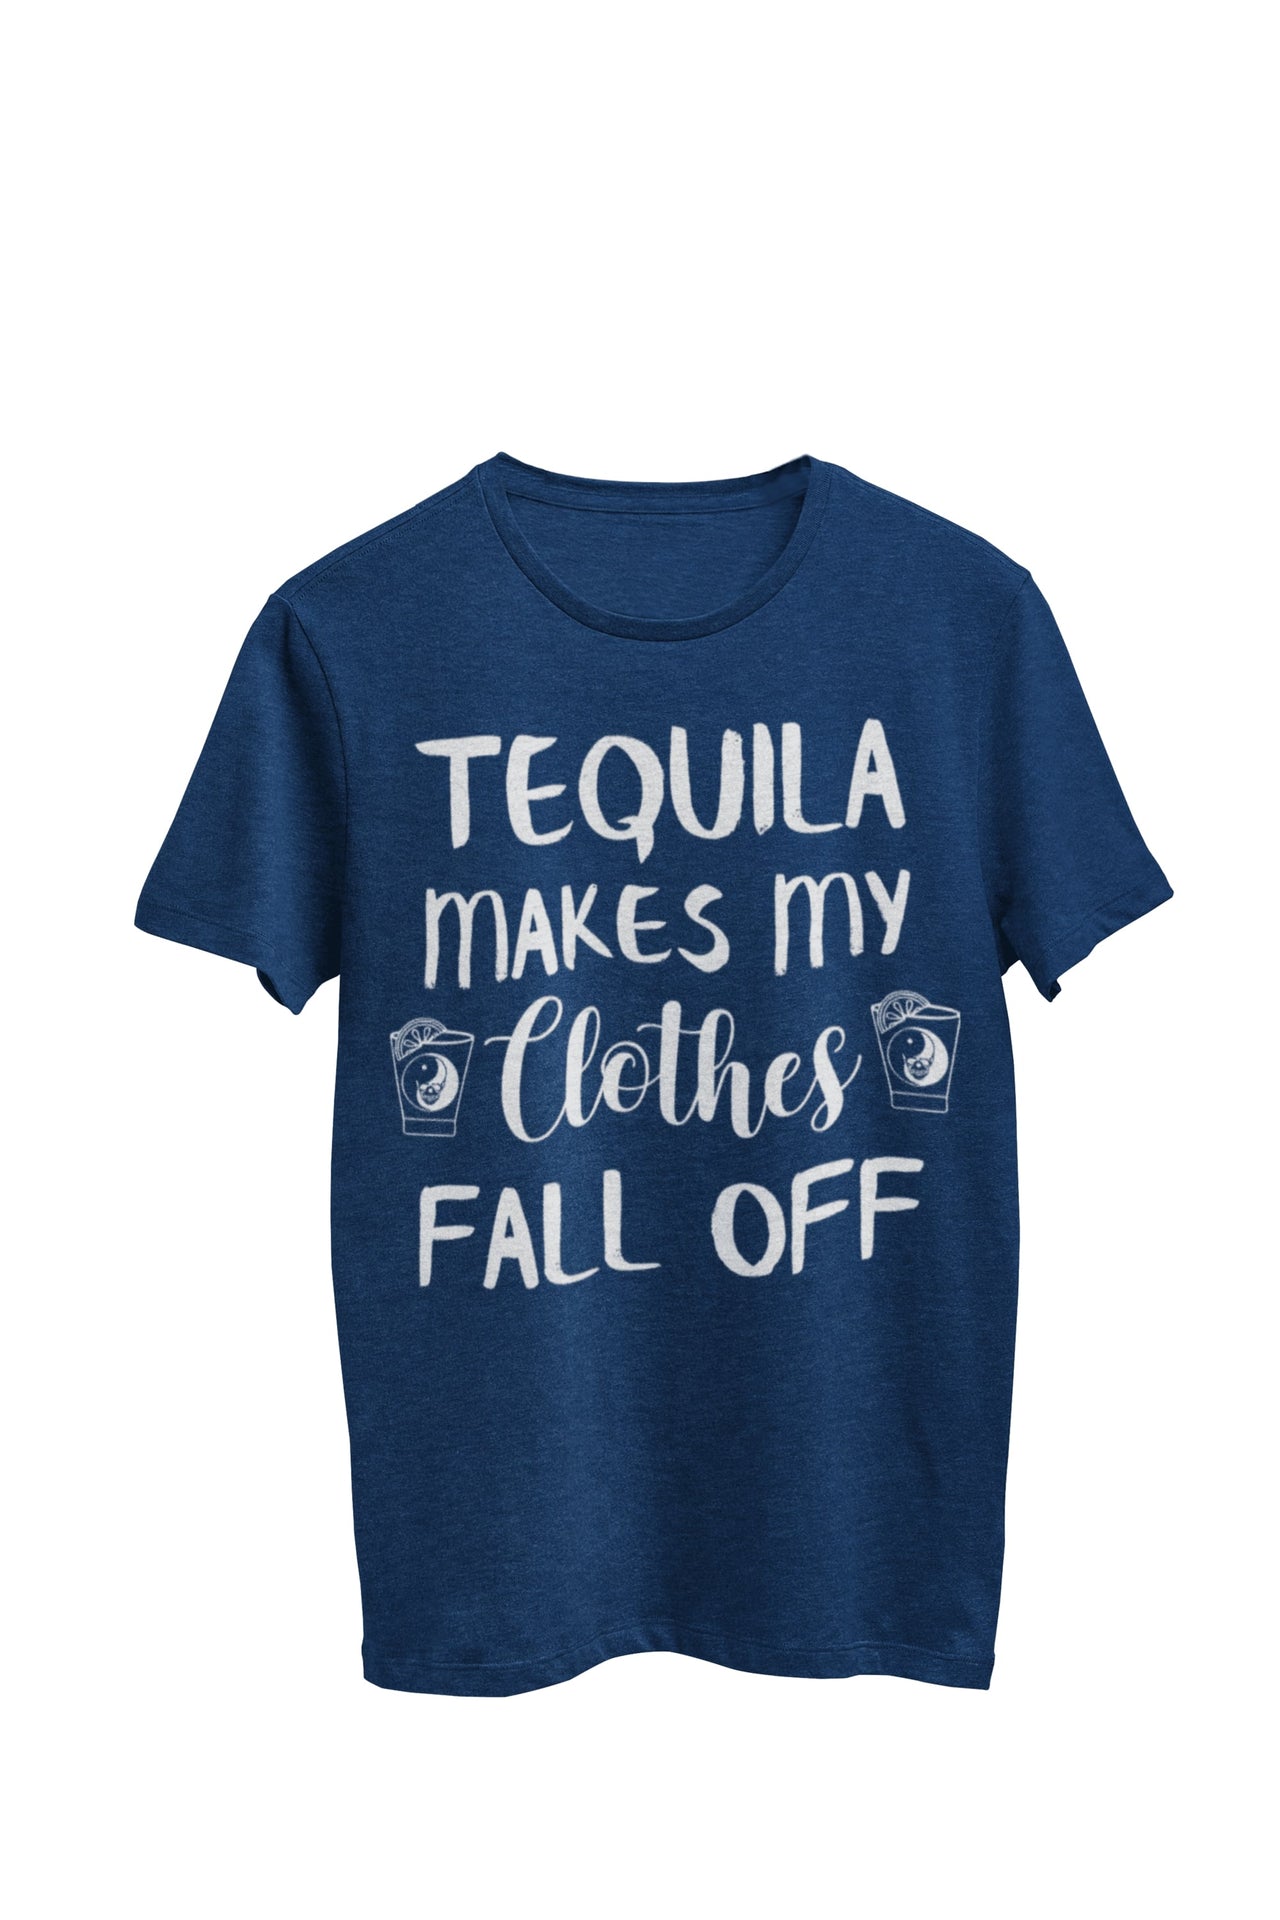 Heather Navy Unisex T-shirt featuring the text 'Tequila makes my clothes fall off,' accompanied by an image of a shot glass with a yin yang symbol on each side of the words. Designed by WooHoo Apparel.